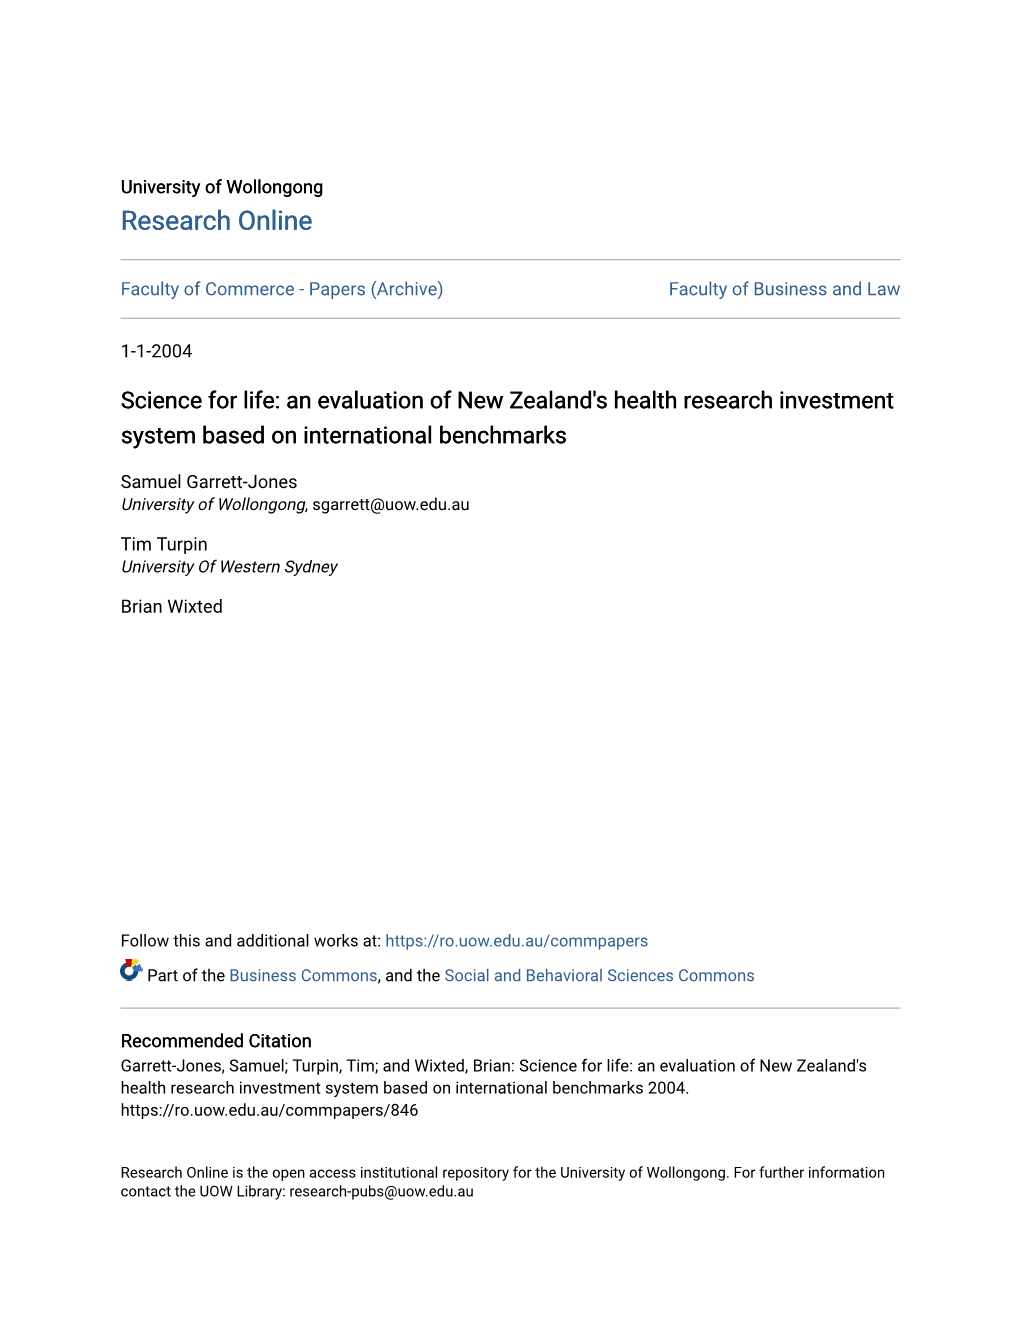 An Evaluation of New Zealand's Health Research Investment System Based on International Benchmarks